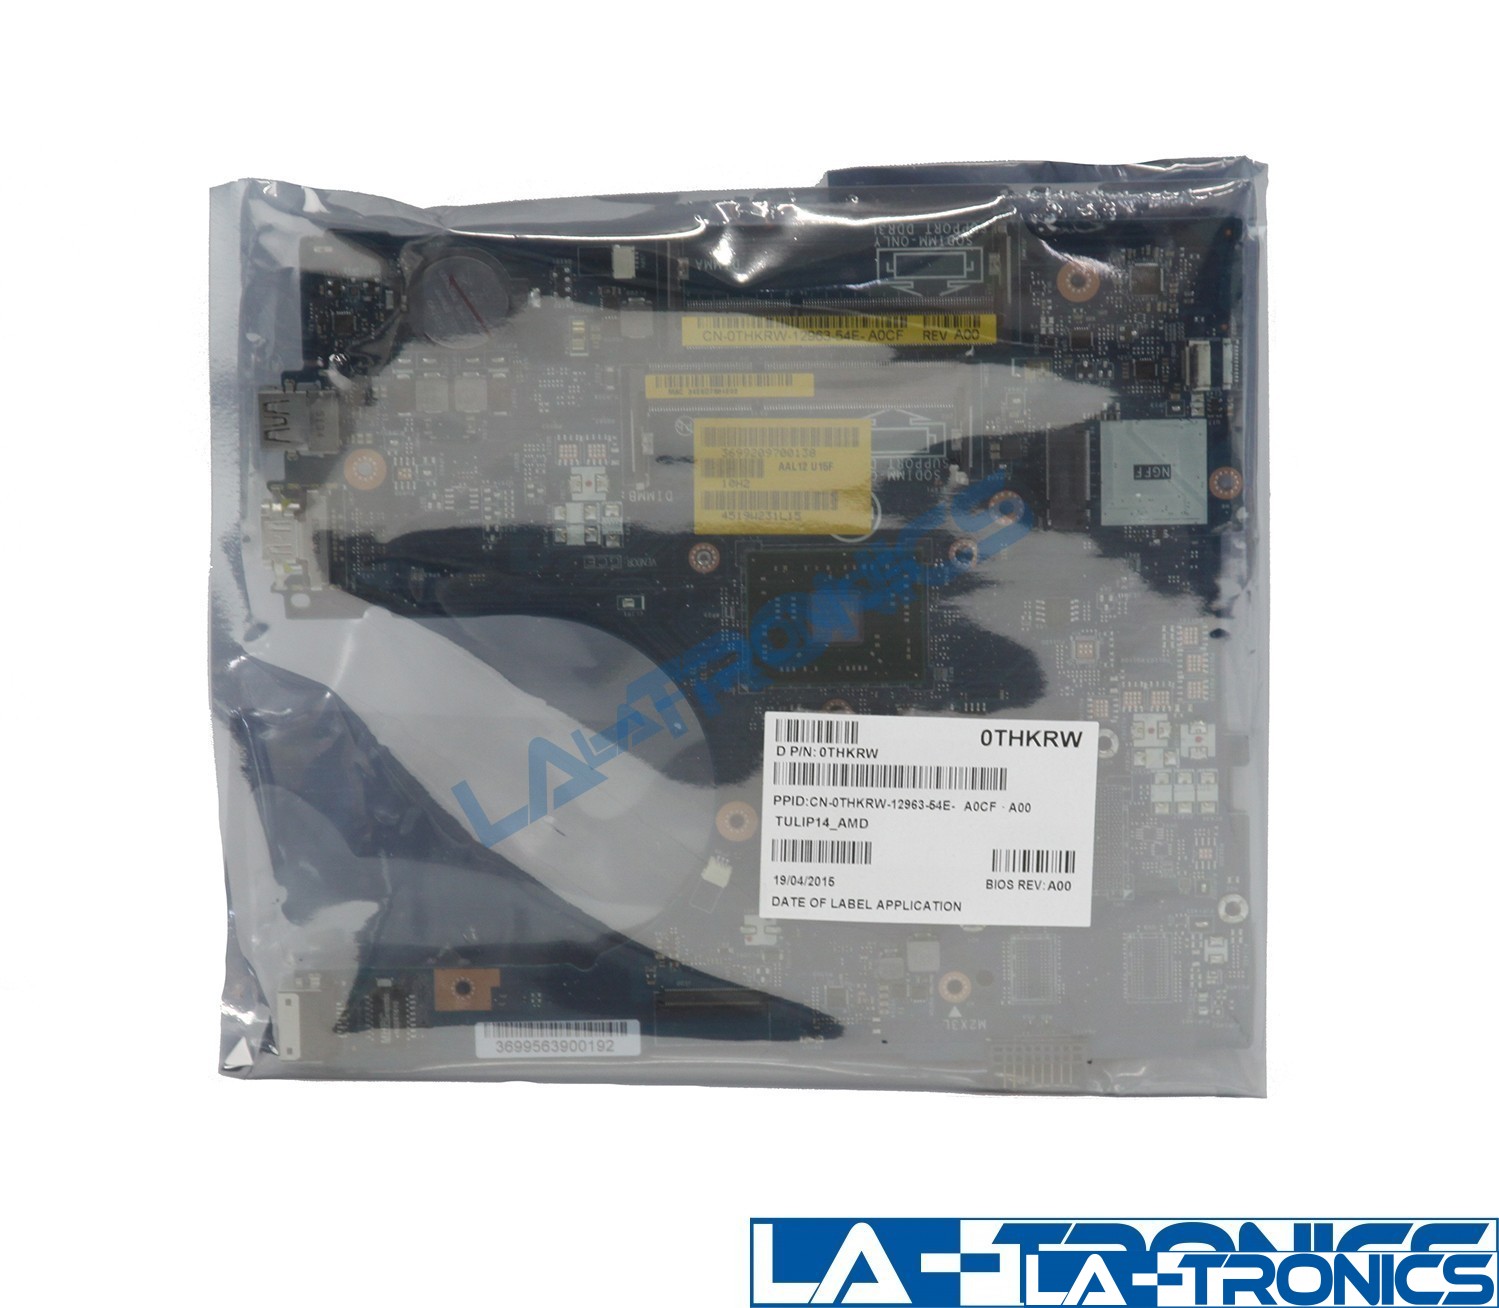 NEW Dell Inspiron 15 5555 Laptop Motherboard AMD A6-7310 2.0GHz THKRW 0THKRW